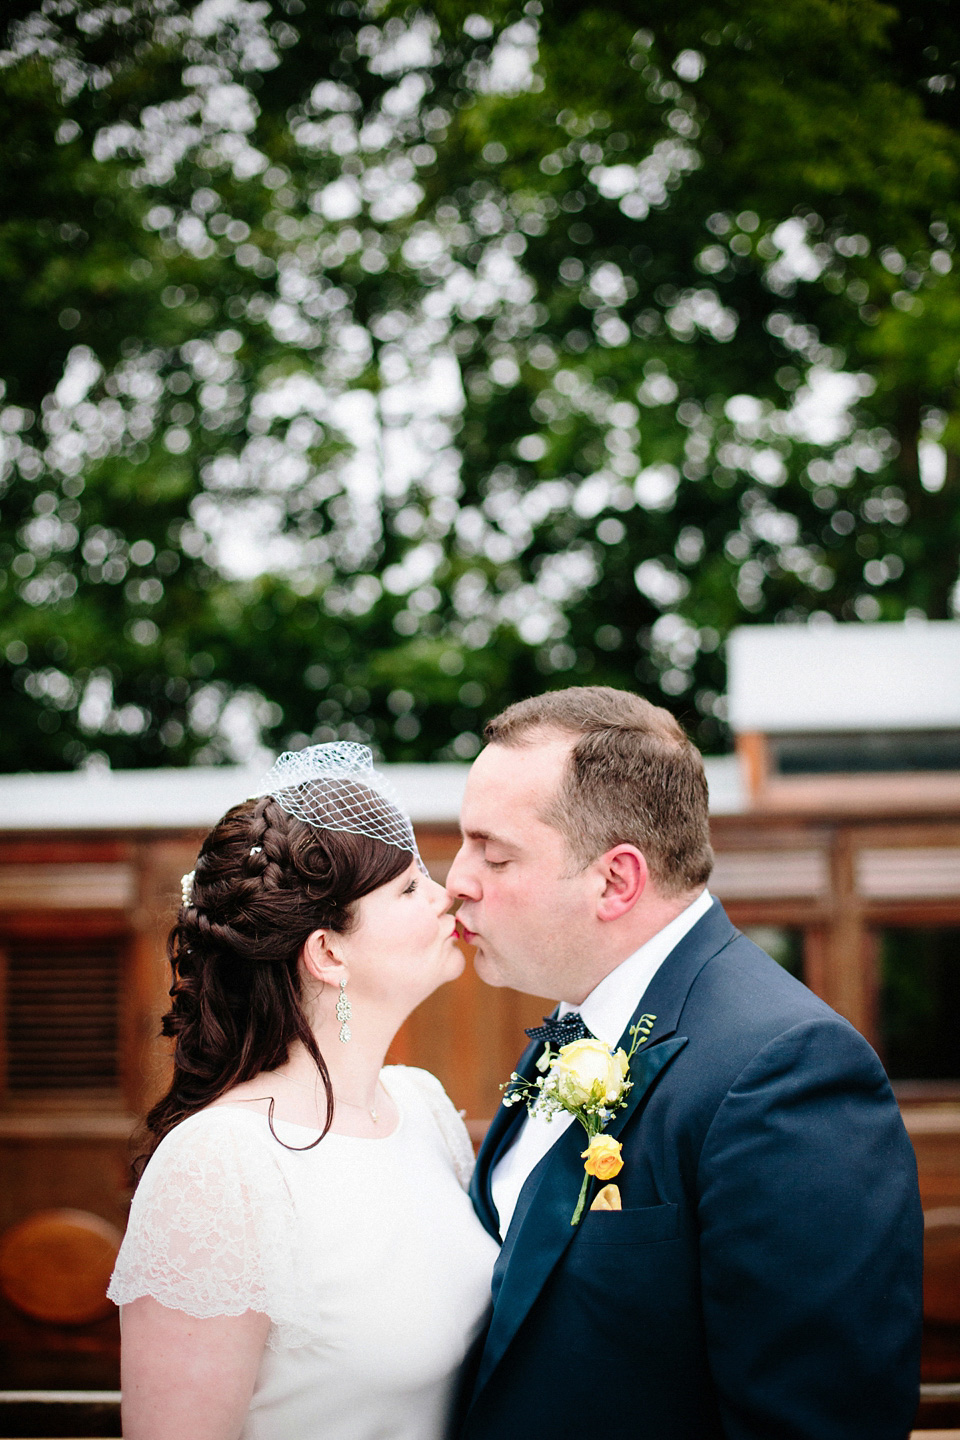 The bride wears Charlie Brear for her 'Railway Children' inspired yellow wedding. Photography by Claudia Rose Carter.